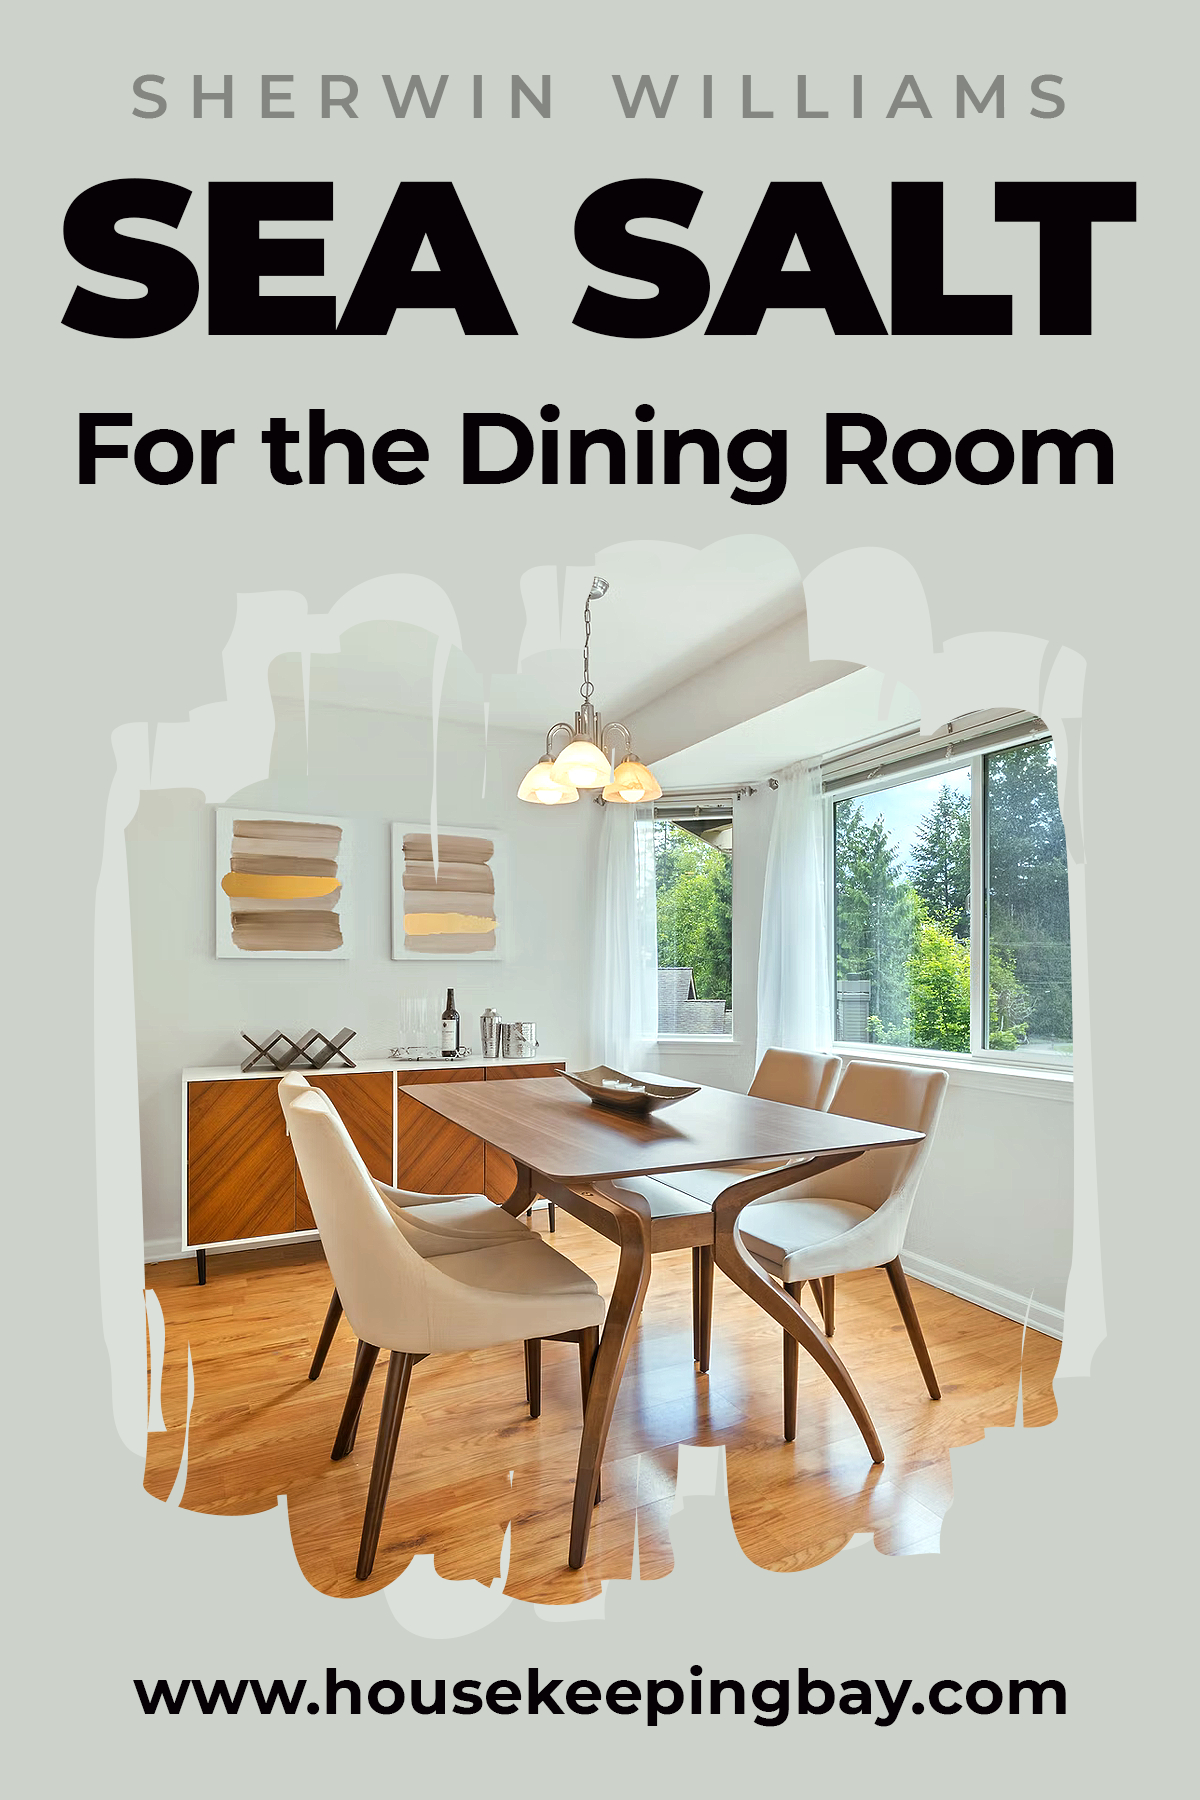 Sherwin Williams Sea Salt For the Dining Room